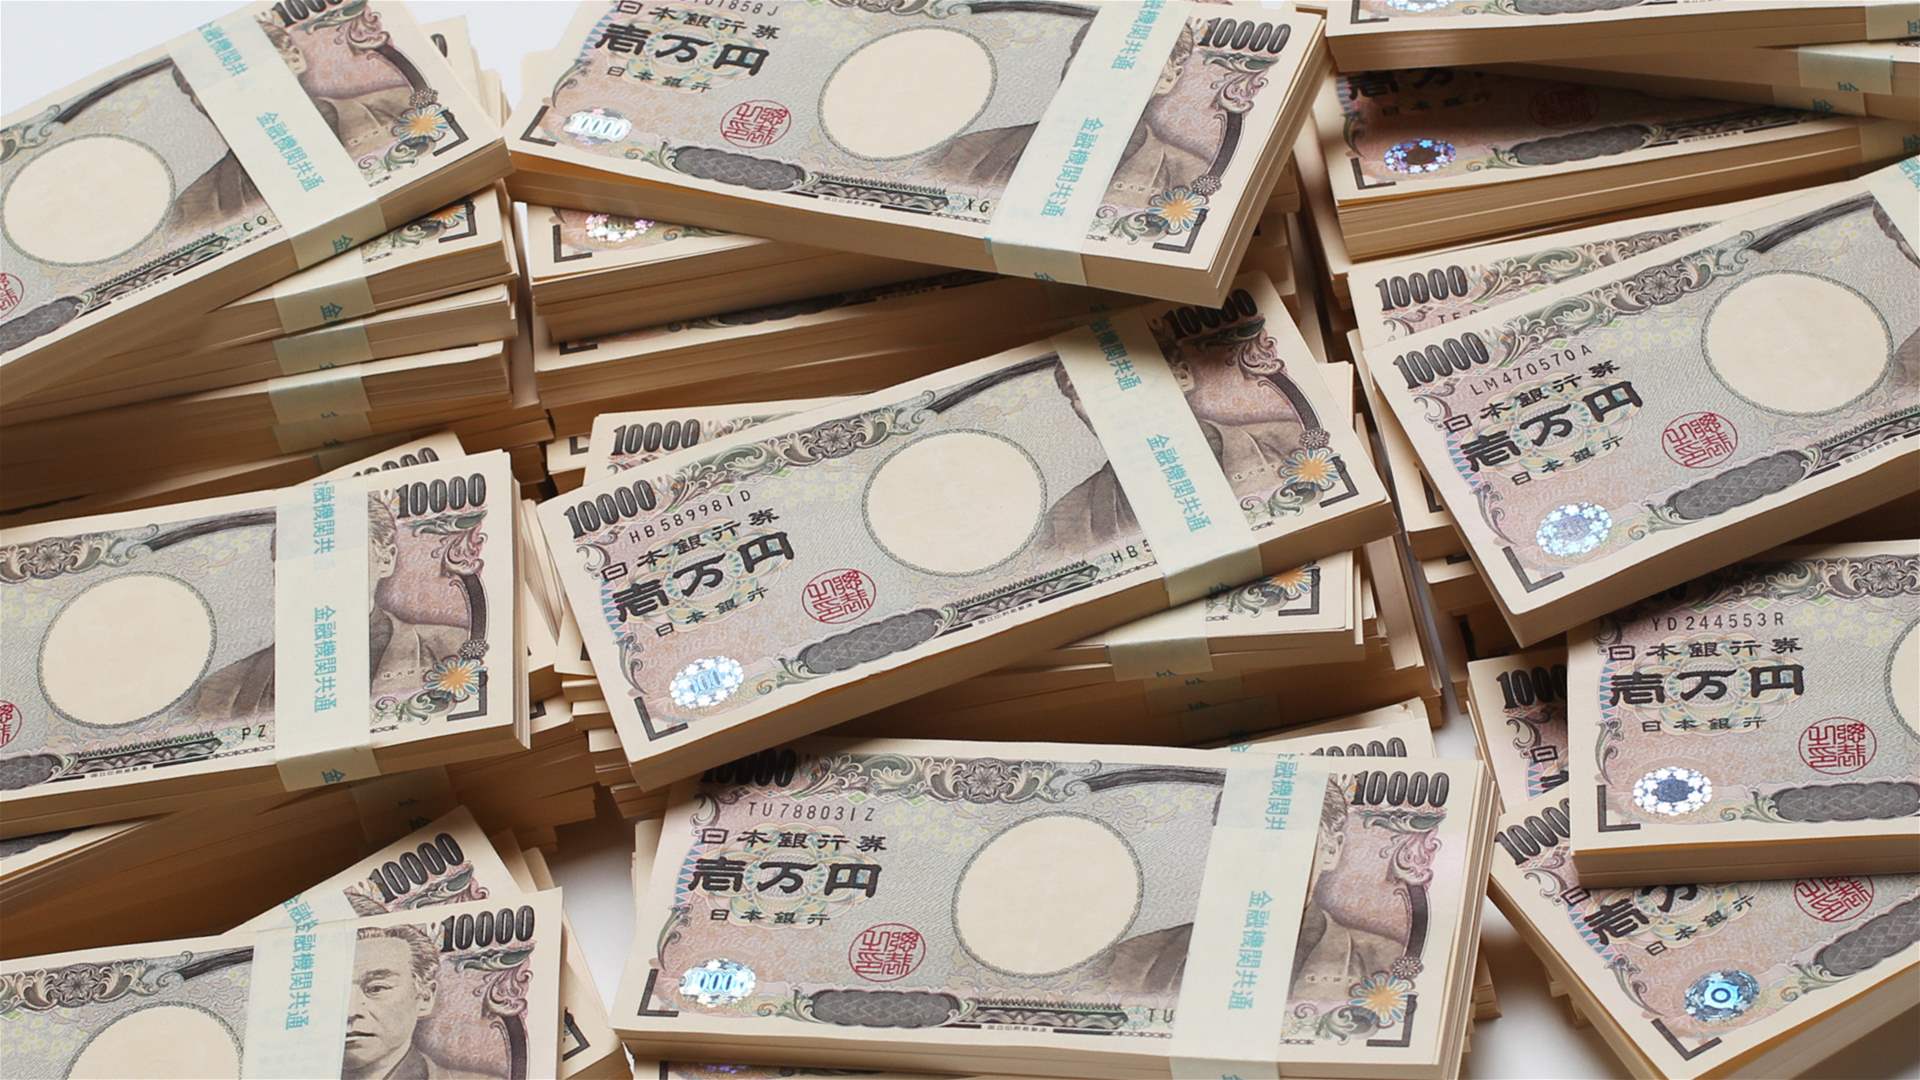 Japan spent $37 billion to support yen over past month